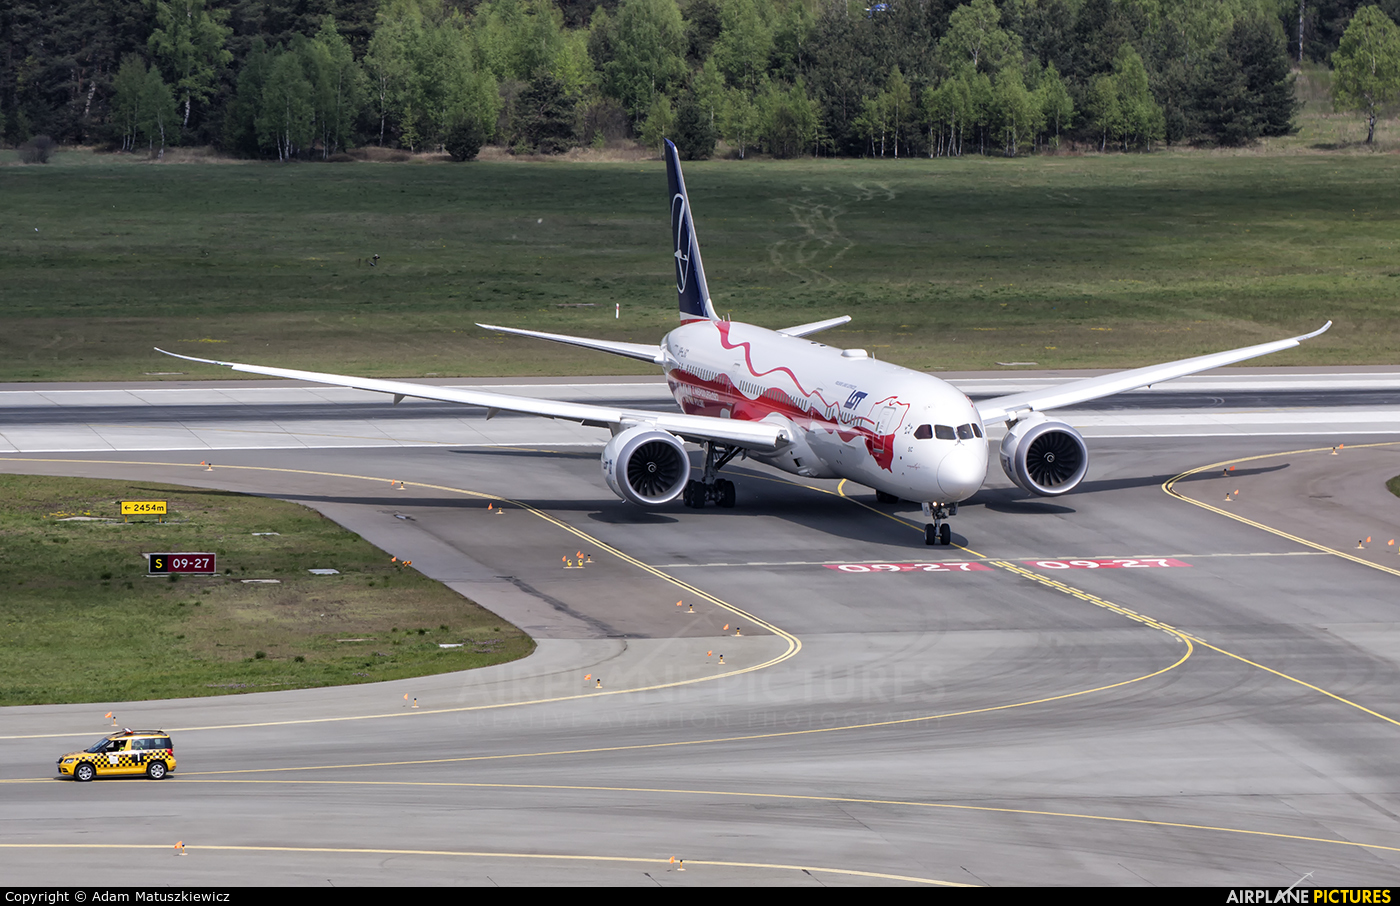 LOT - Polish Airlines SP-LSC aircraft at Katowice - Pyrzowice